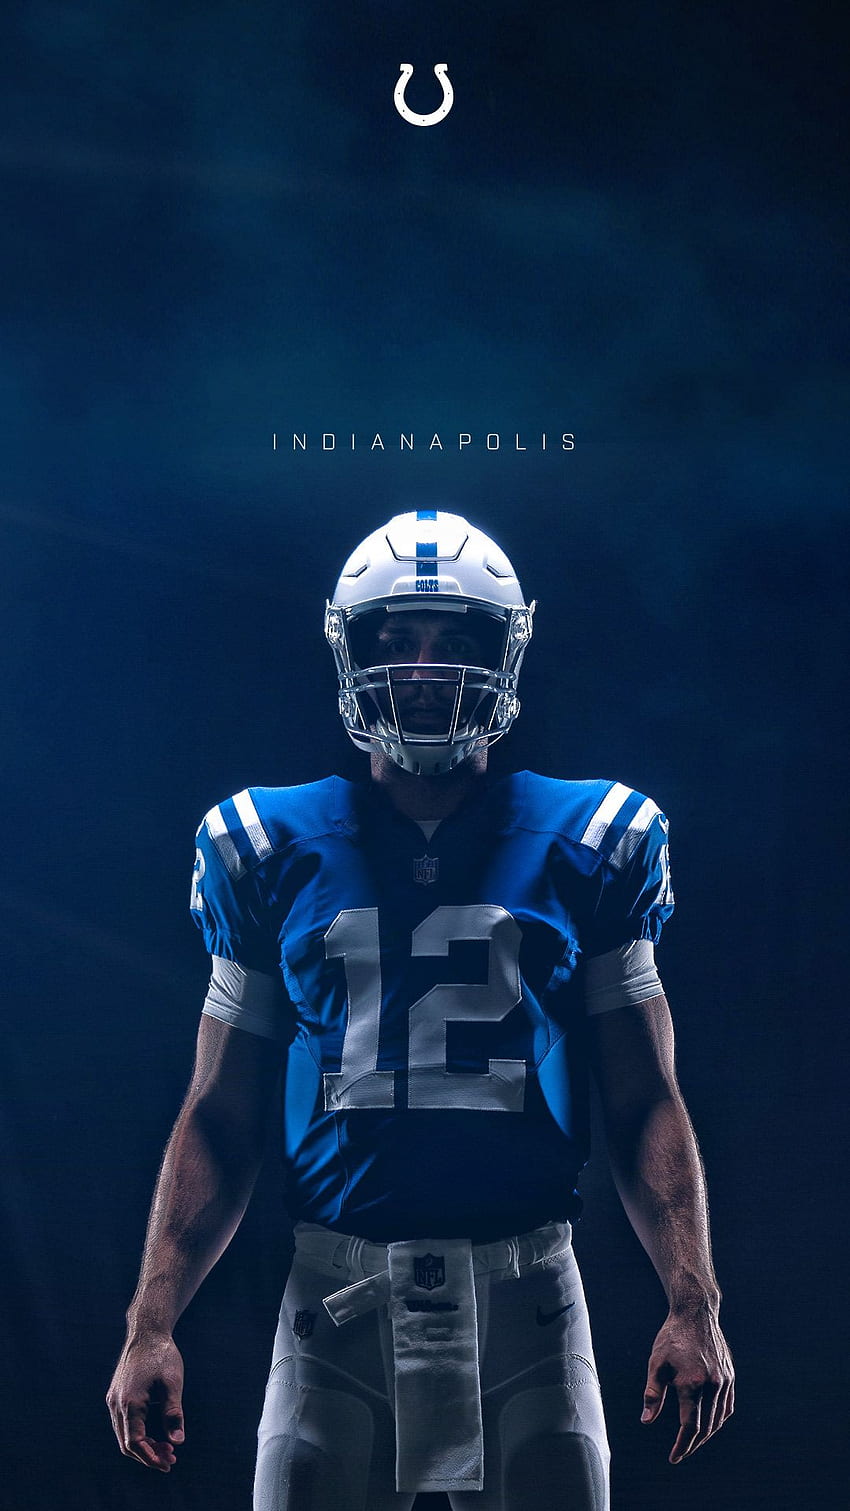 Free download download this iphone wallpaper you can download our iphone  wallpapers 325x576 for your Desktop Mobile  Tablet  Explore 50  Indianapolis Colts iPhone Wallpaper  Indianapolis Colts Wallpaper 2015  Indianapolis